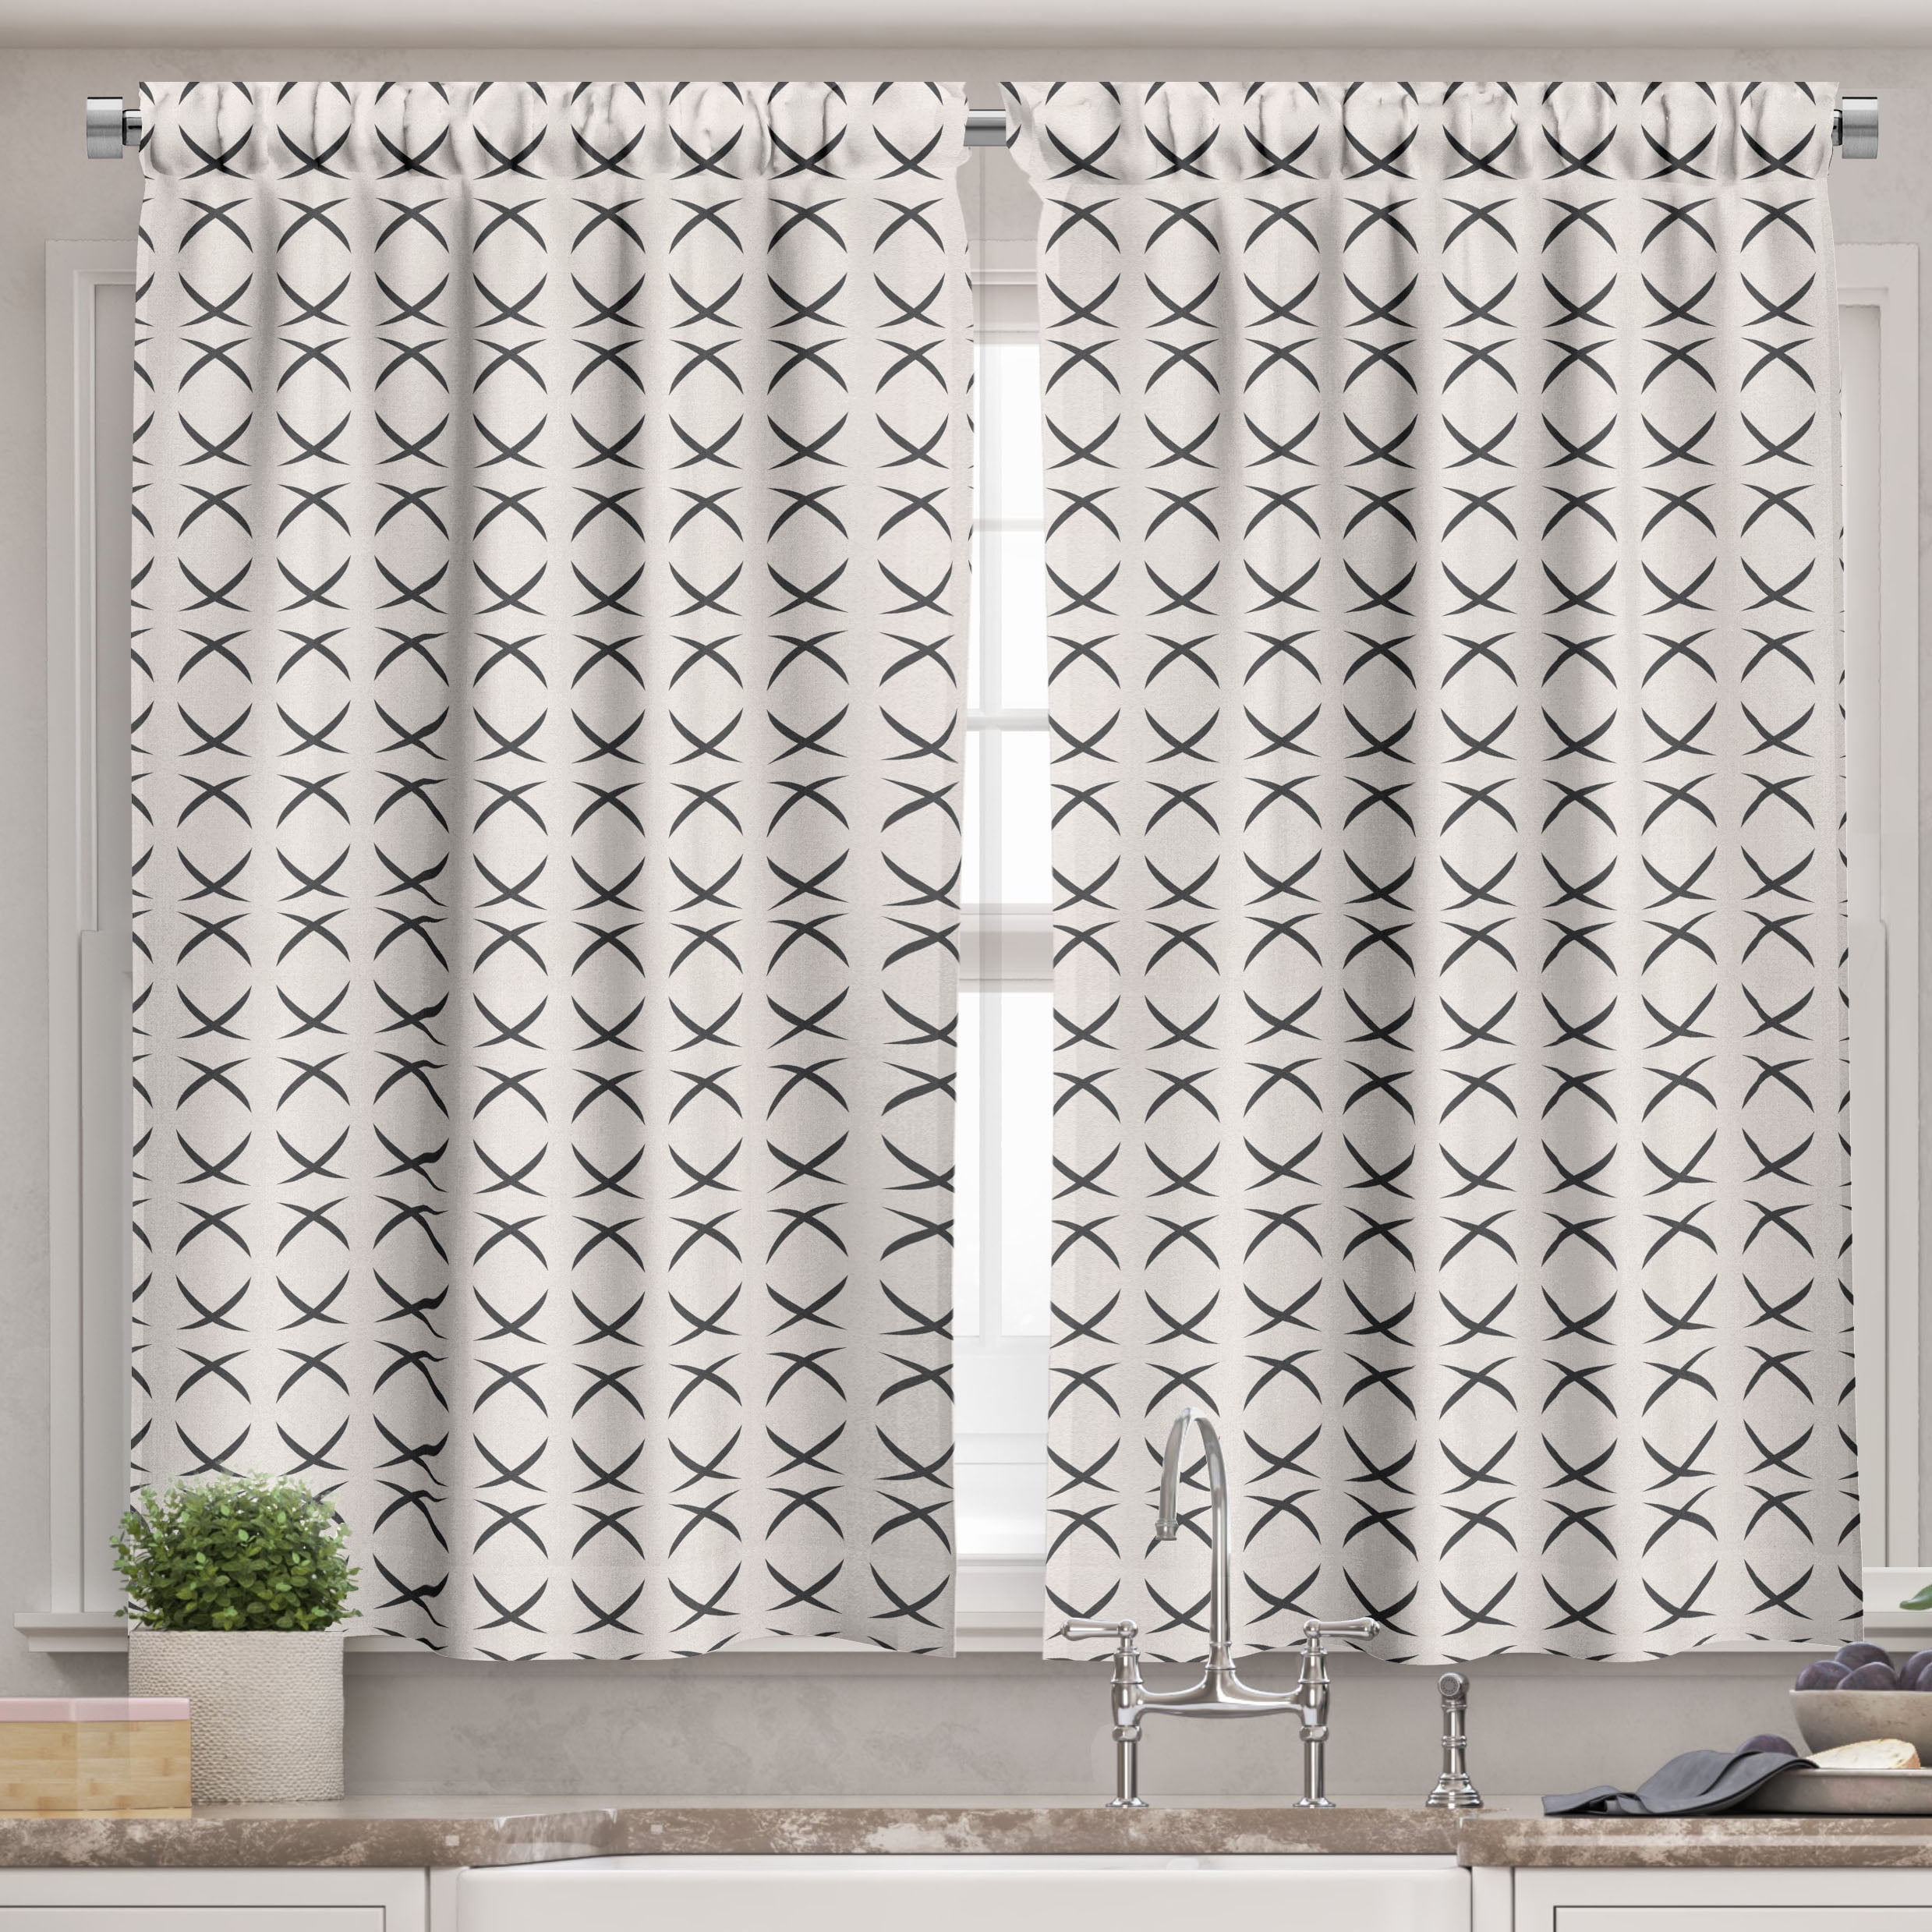 Geometric Valance & Tier Curtain 3 pcs Set, Modern Contemporary Image  Shapes Art Half Round Circles, Window Treatments Room Kitchen Decor, 4  Sizes, Charcoal Grey Pearl, by Ambesonne - Walmart.com